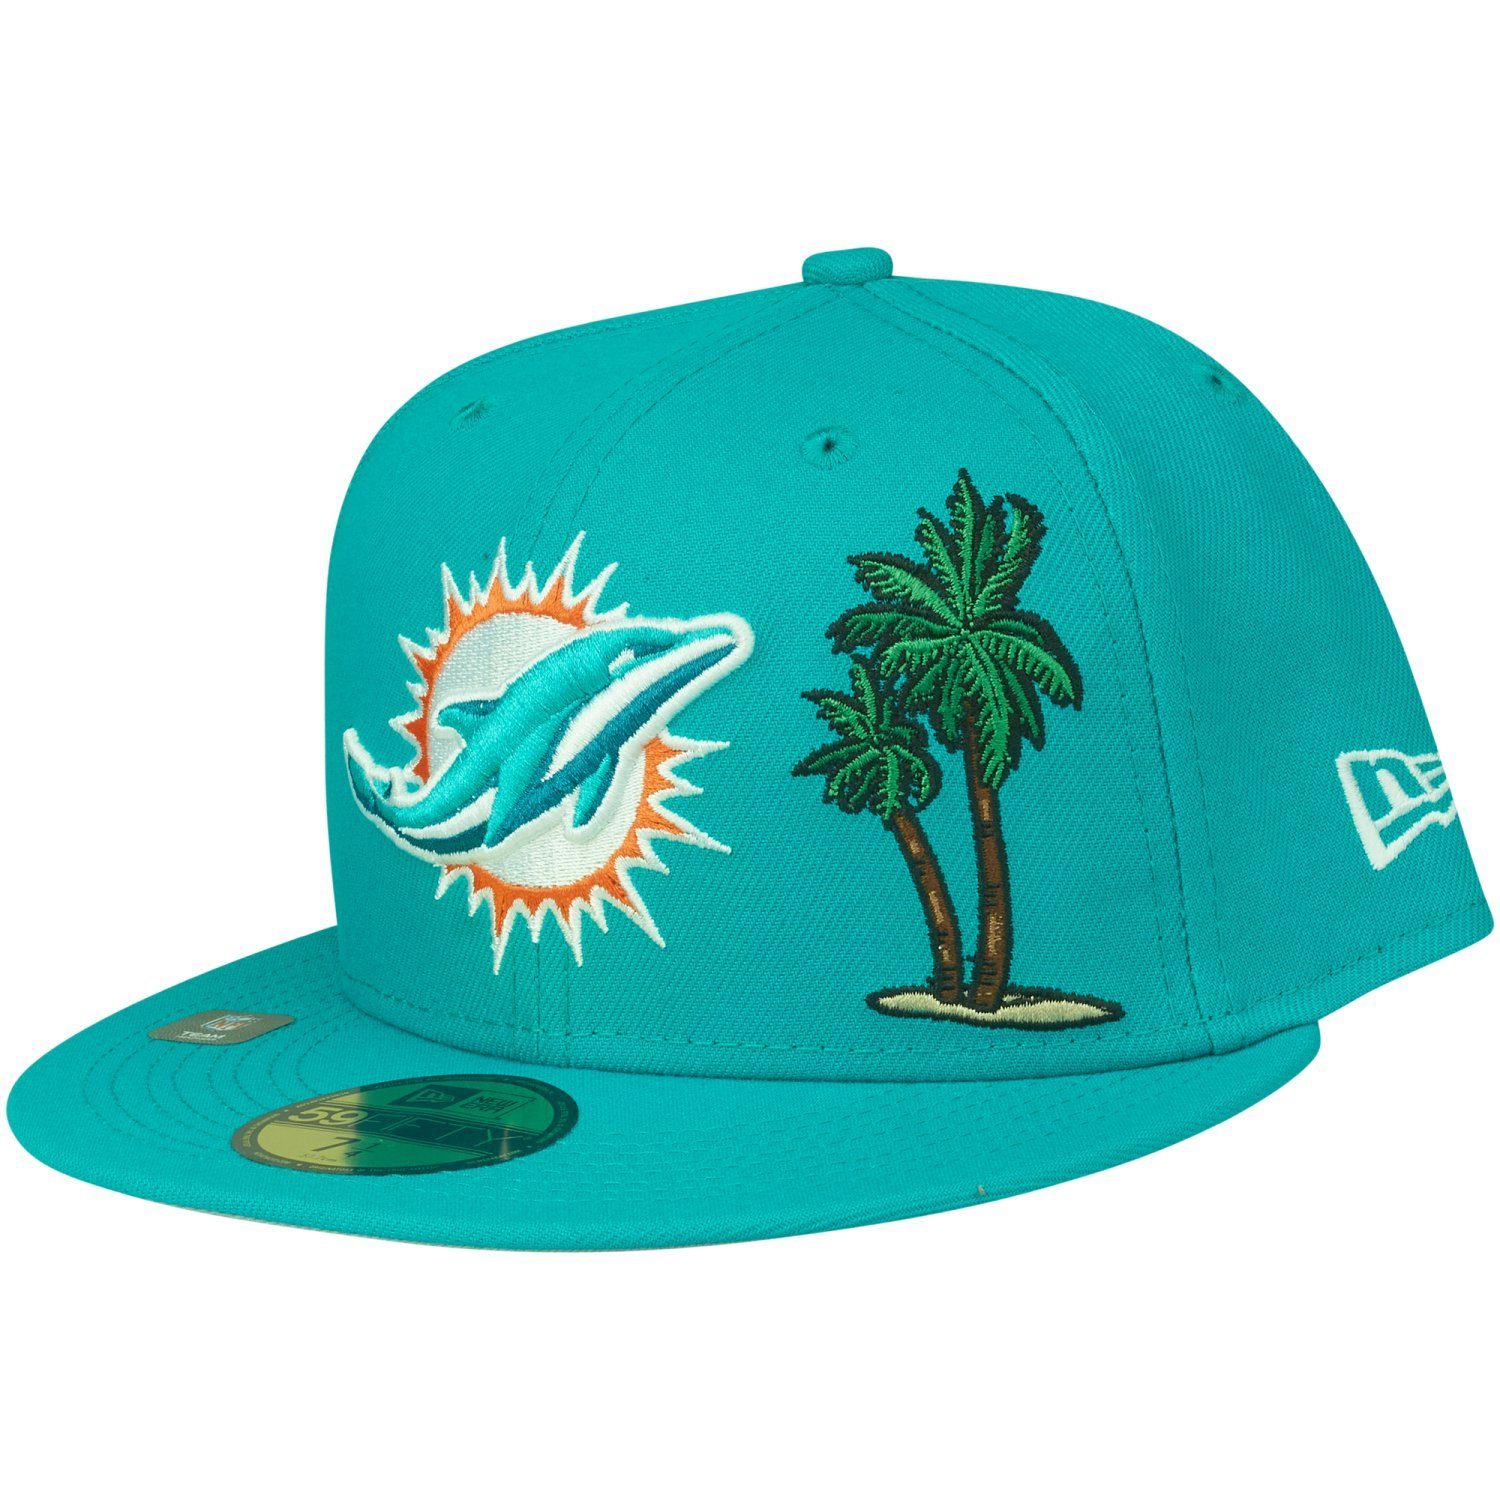 New Era Fitted Cap 59Fifty NFL CITY Miami Dolphins